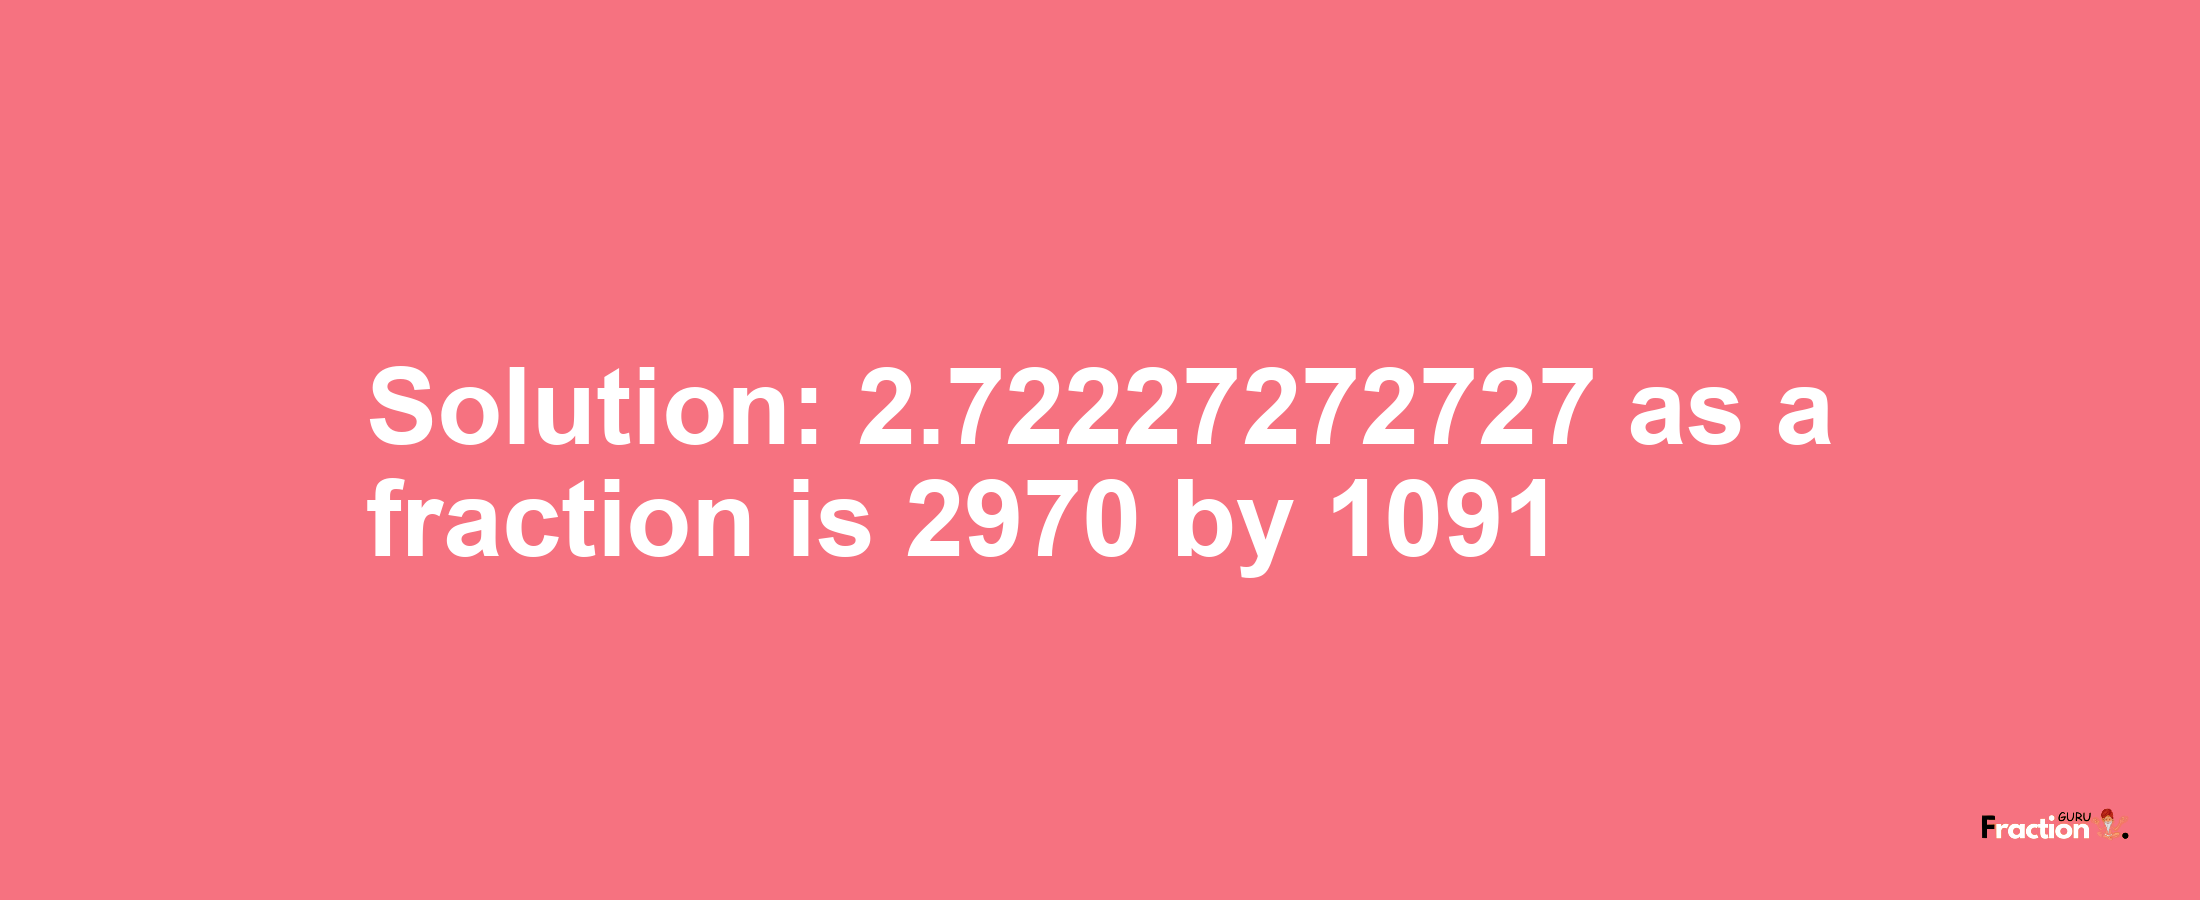 Solution:2.72227272727 as a fraction is 2970/1091